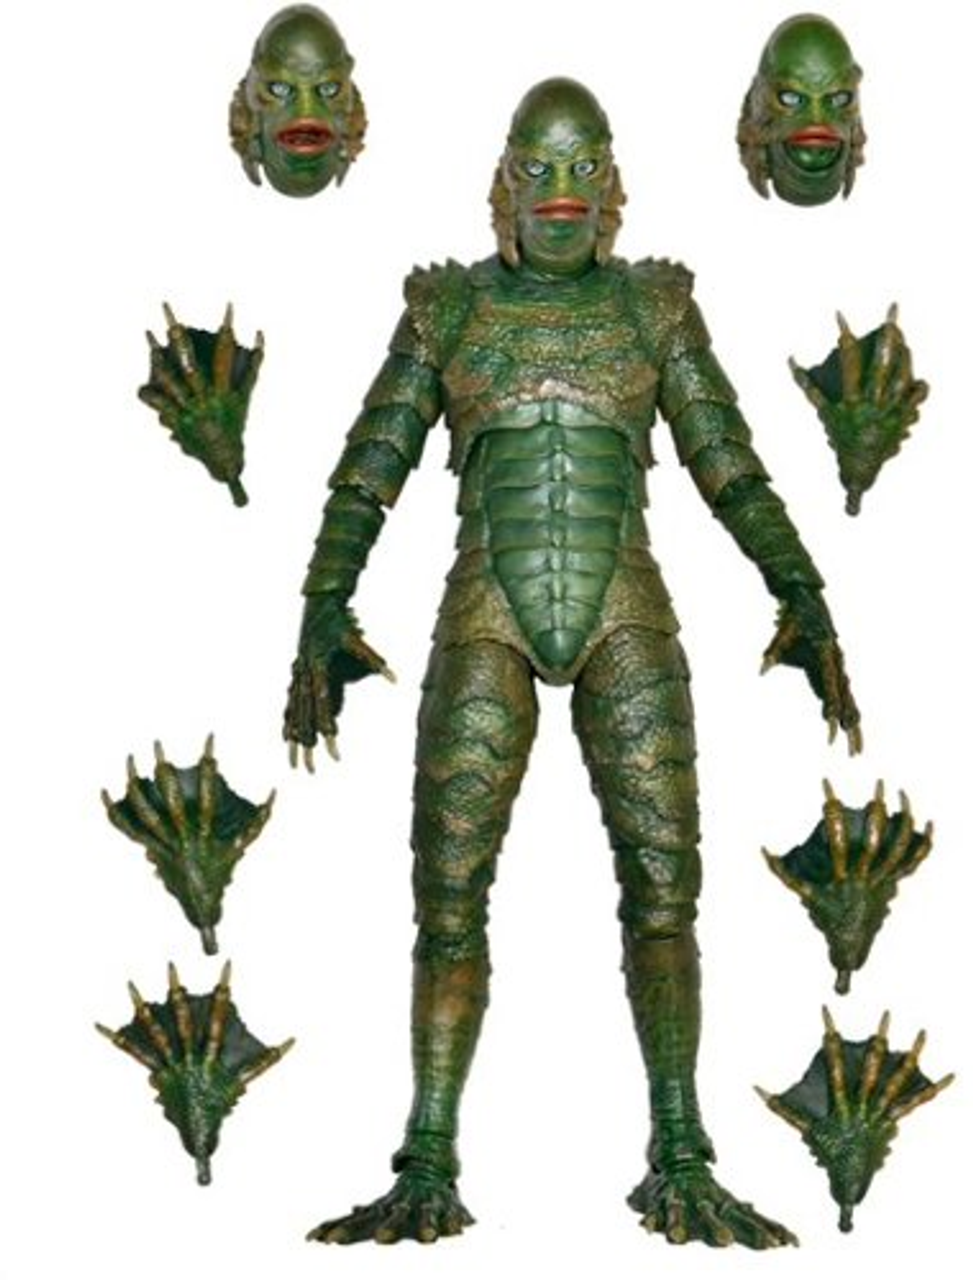 NECA - Universal Monsters 7” Scale Action Figure Ultimate Creature from the Black Lagoon (Color)